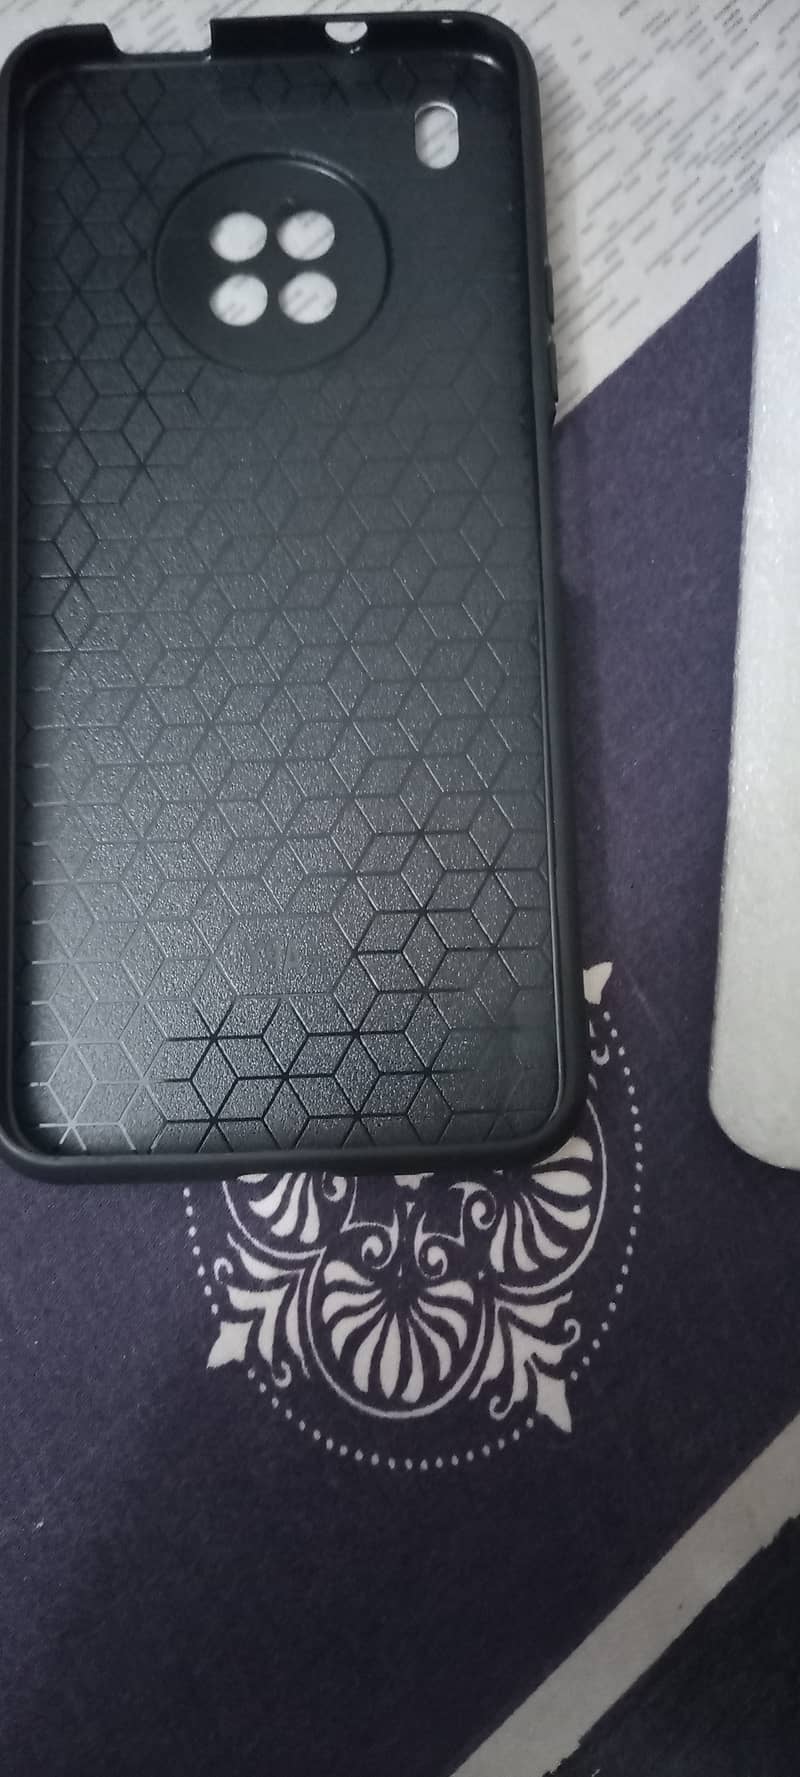 Mobile Back Covers - Qmobile L20, I9 and huawei Y9A hello Glass case 1